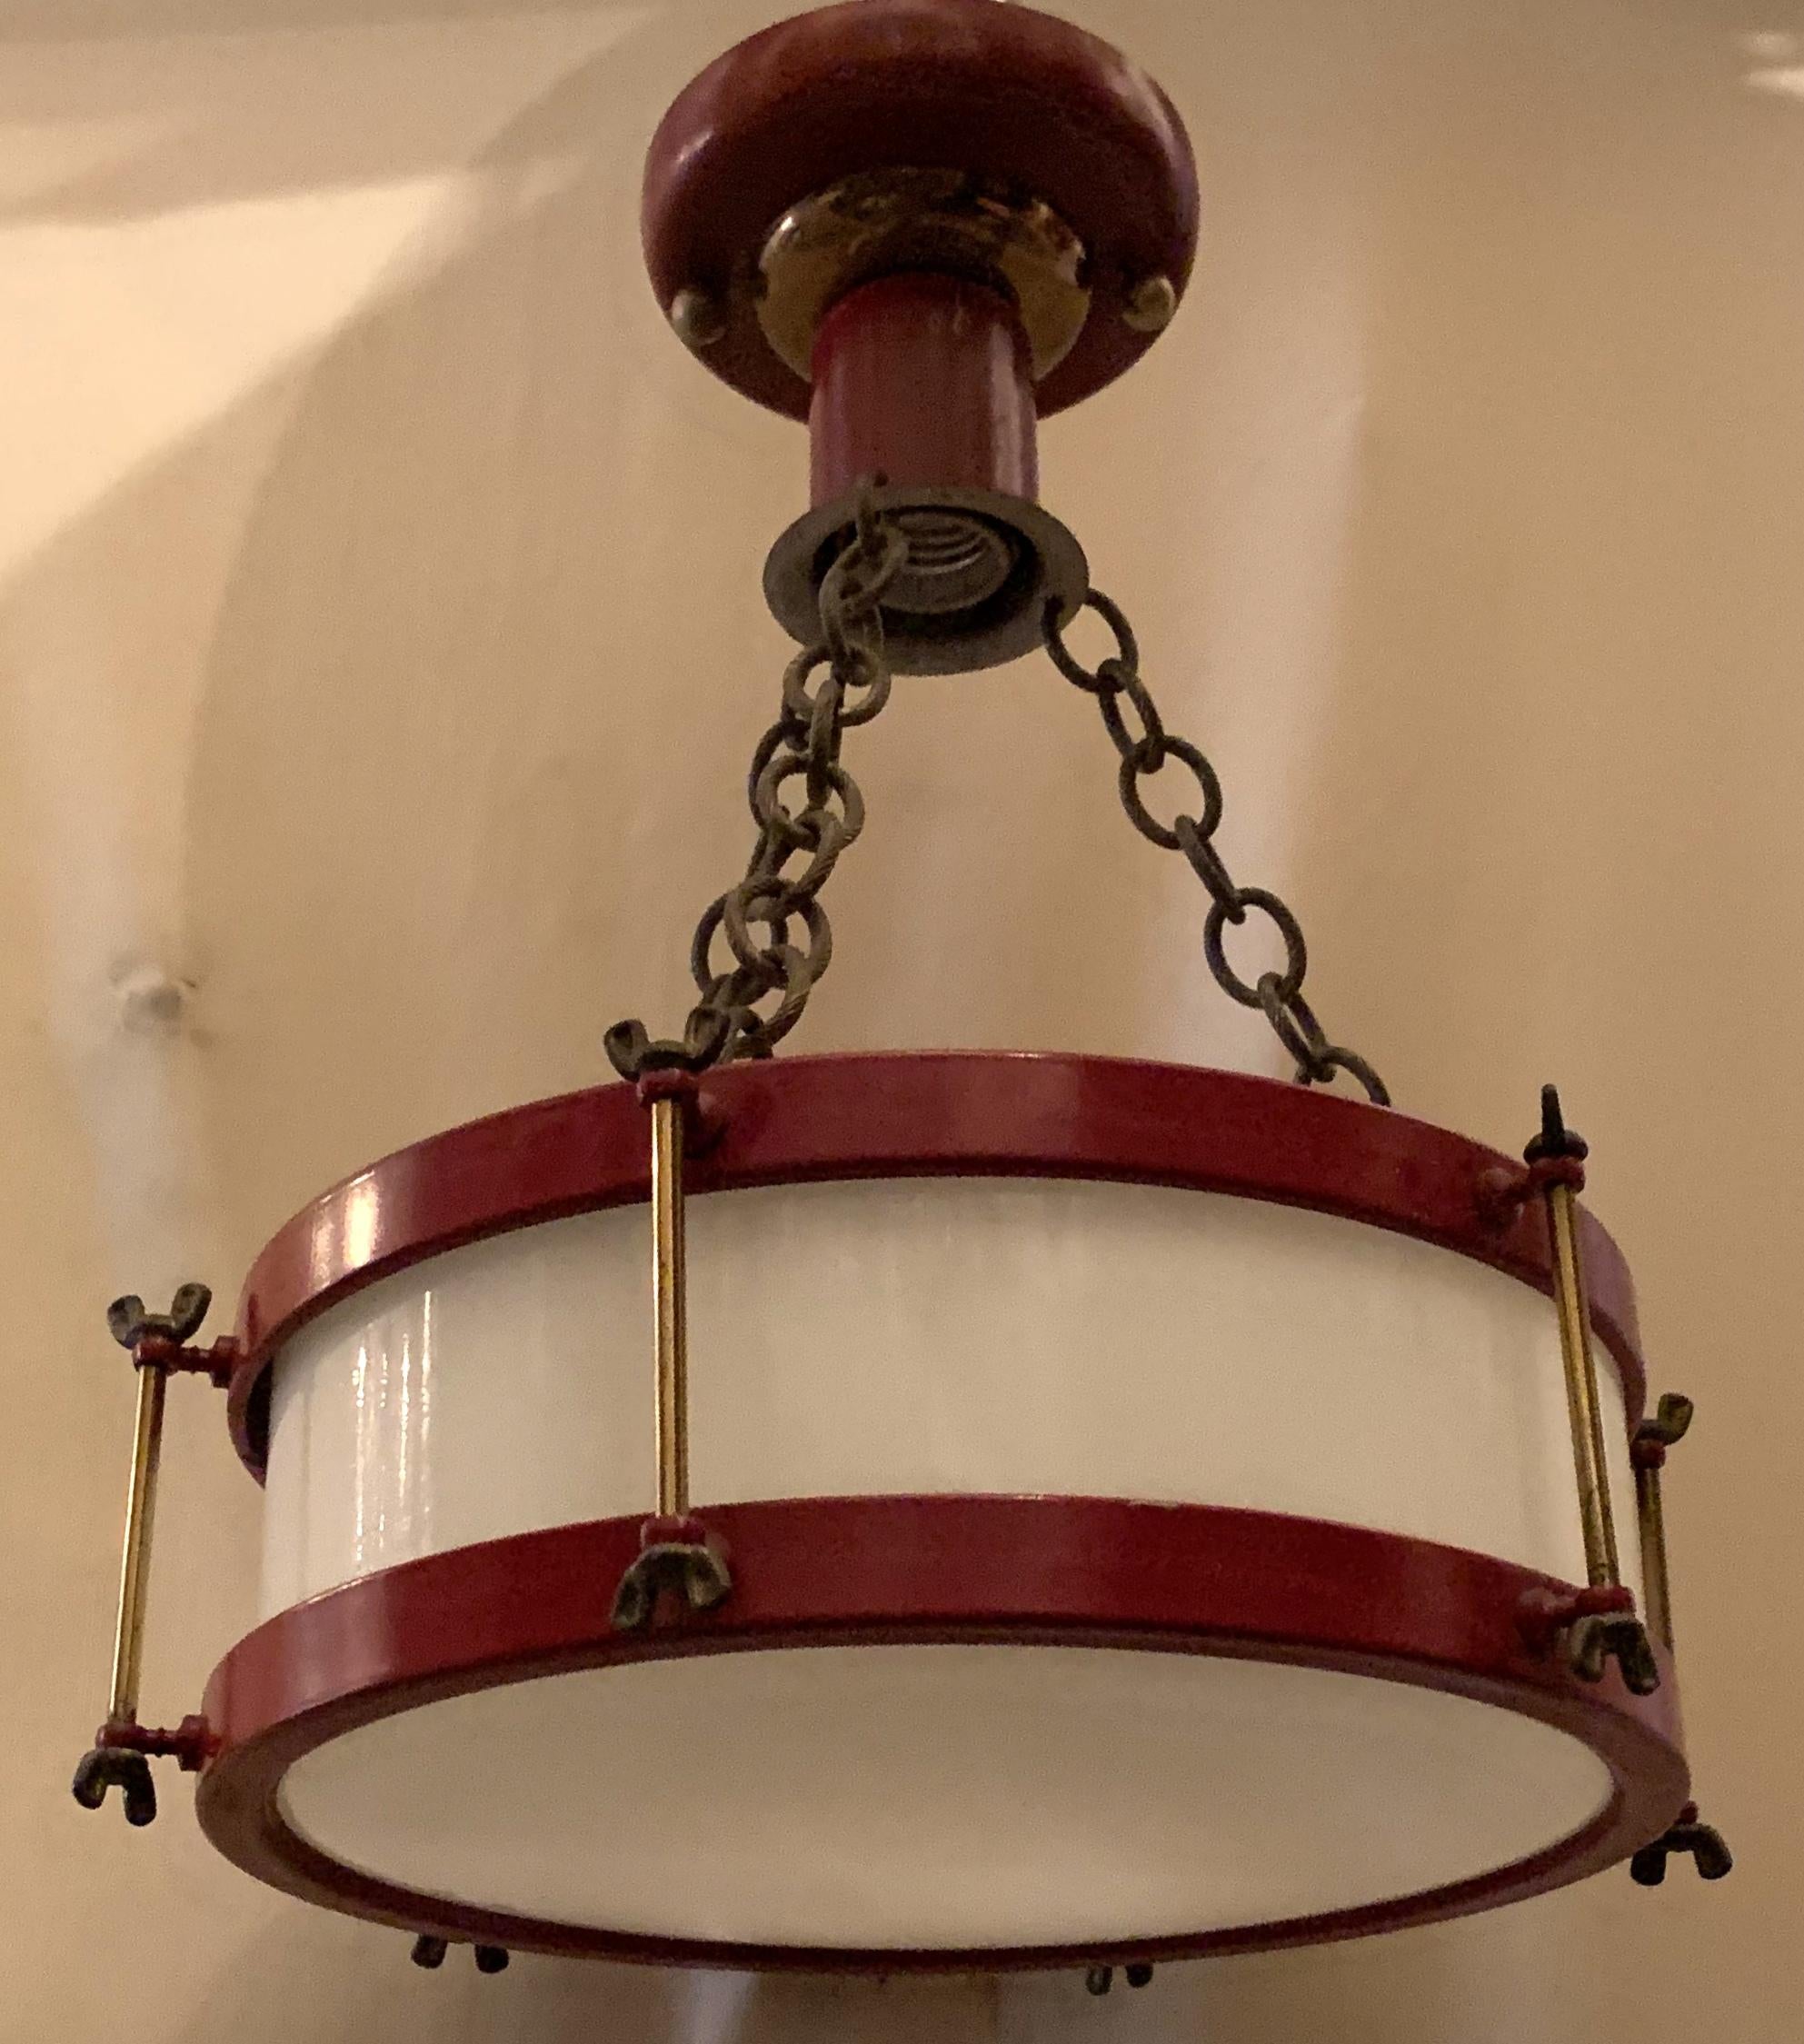 Vintage Red White Glass Bronze Snare Drum Flush Mount Light Fixture Chandelier In Good Condition For Sale In Roslyn, NY